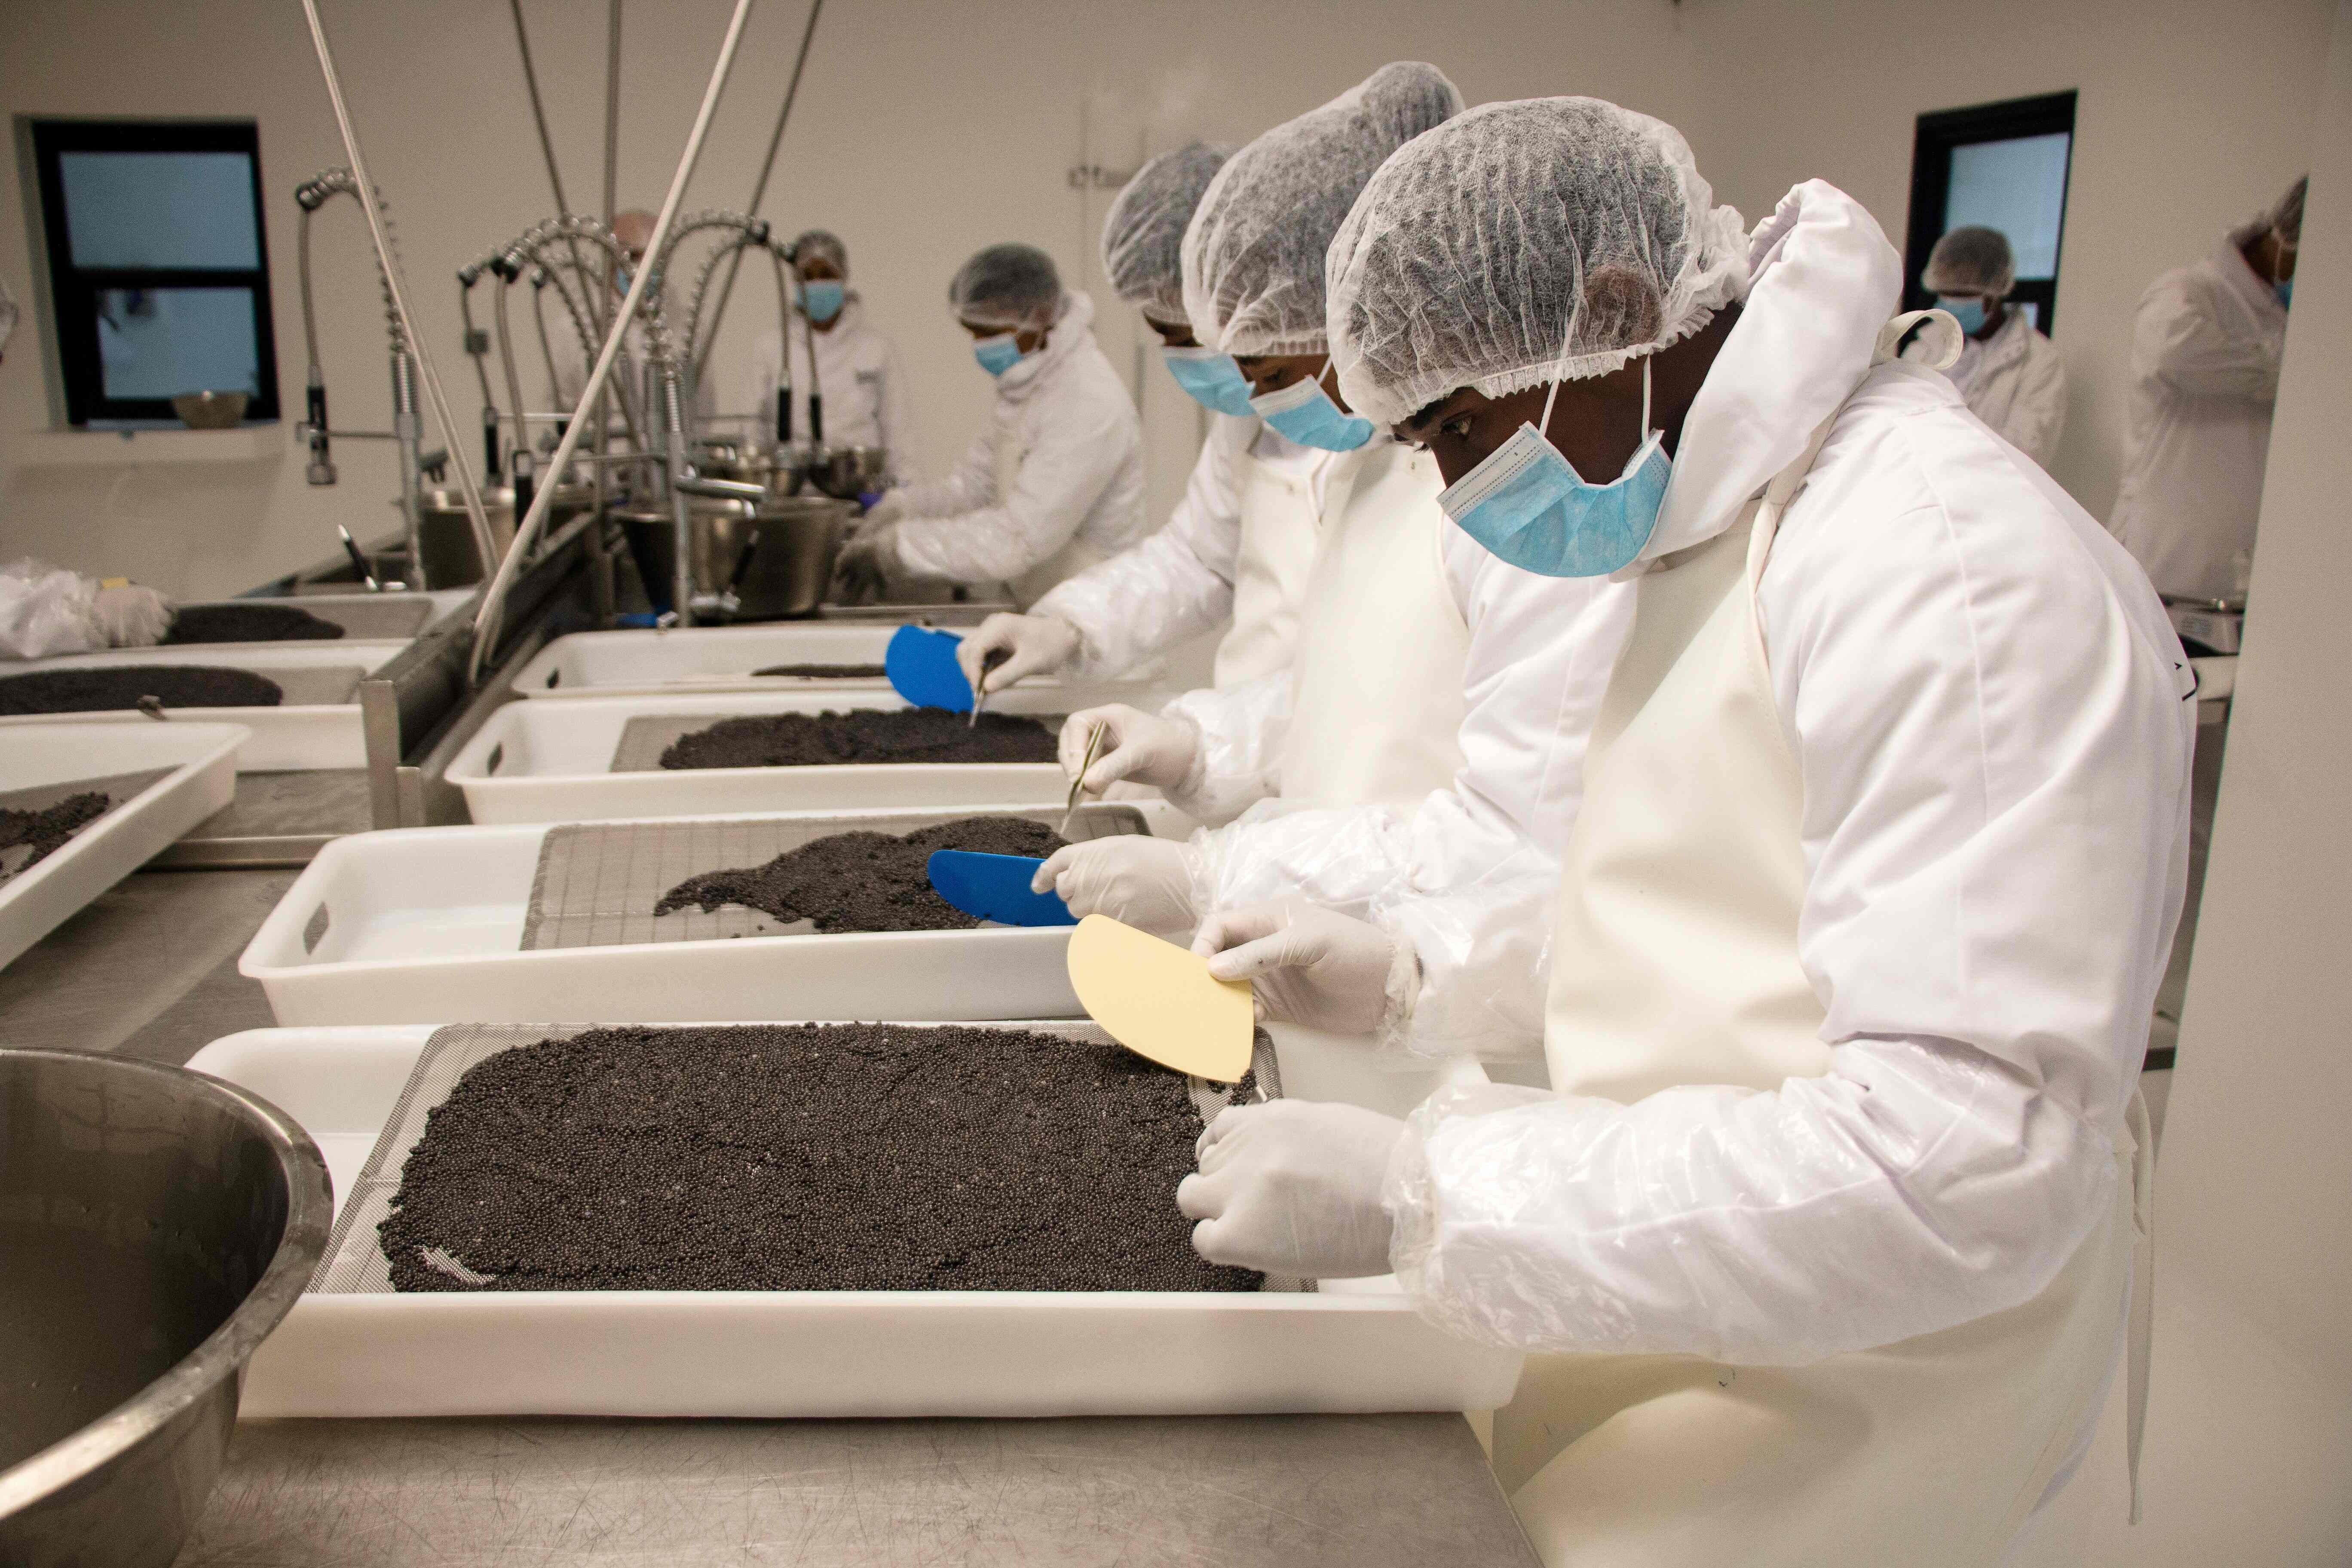 Workers at Rova Caviar Madagascar grade and analyse the caviar extracted from a sturgeon at the Acipenser factory, last June in Mantasoa, Madagascar. Photo: AFP